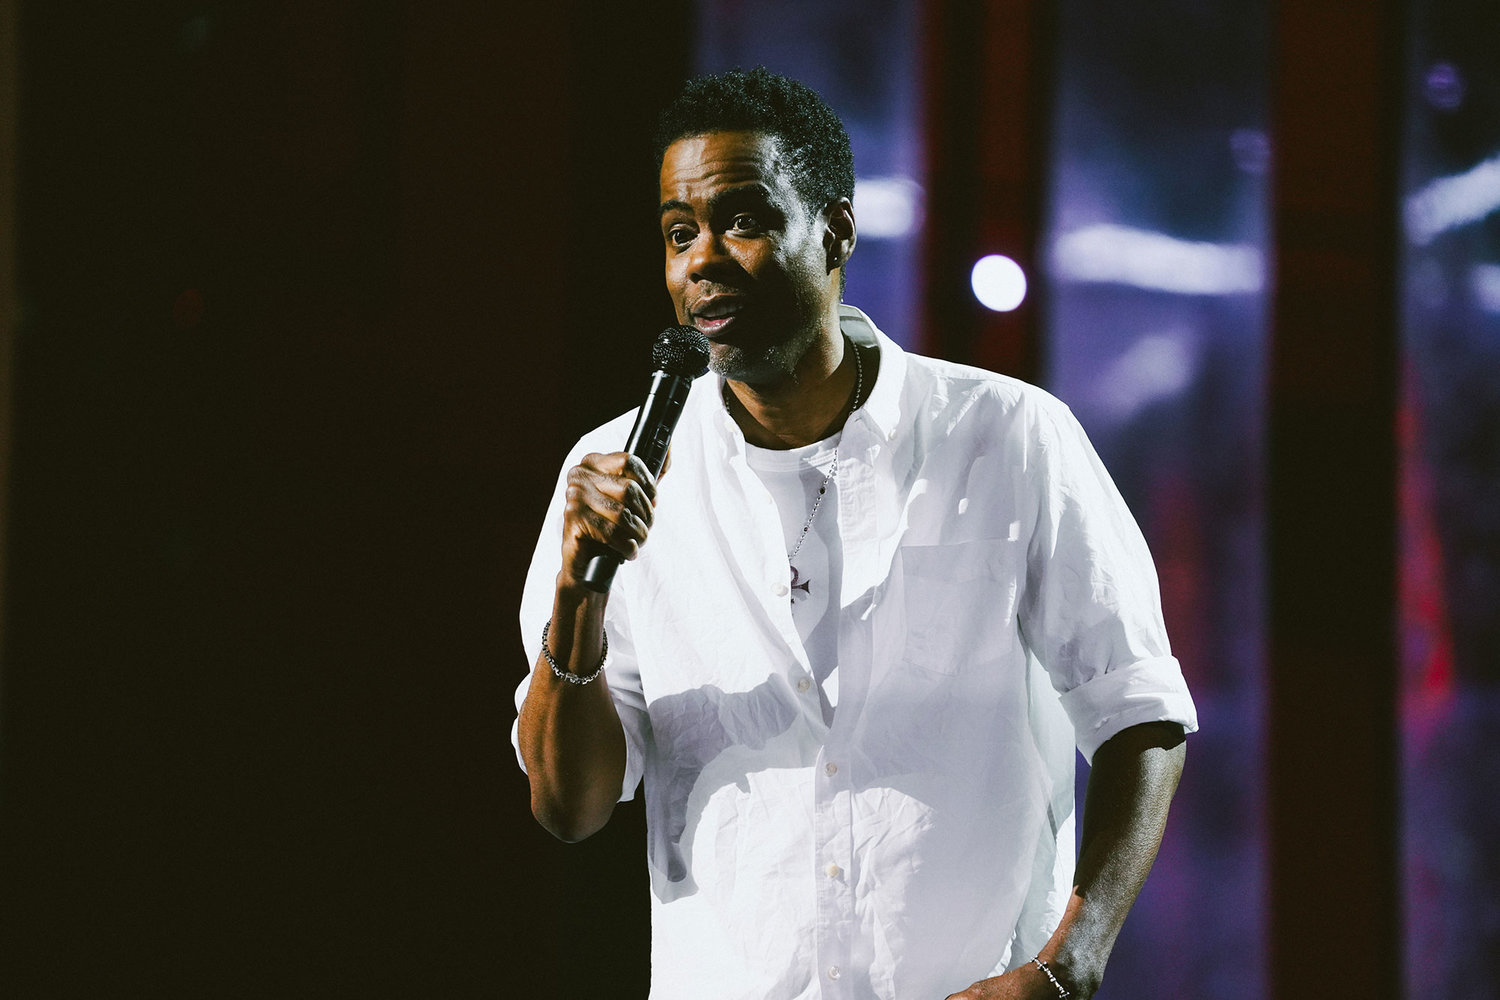 Chris Rock at the Hippodrome Theater in Baltimore.